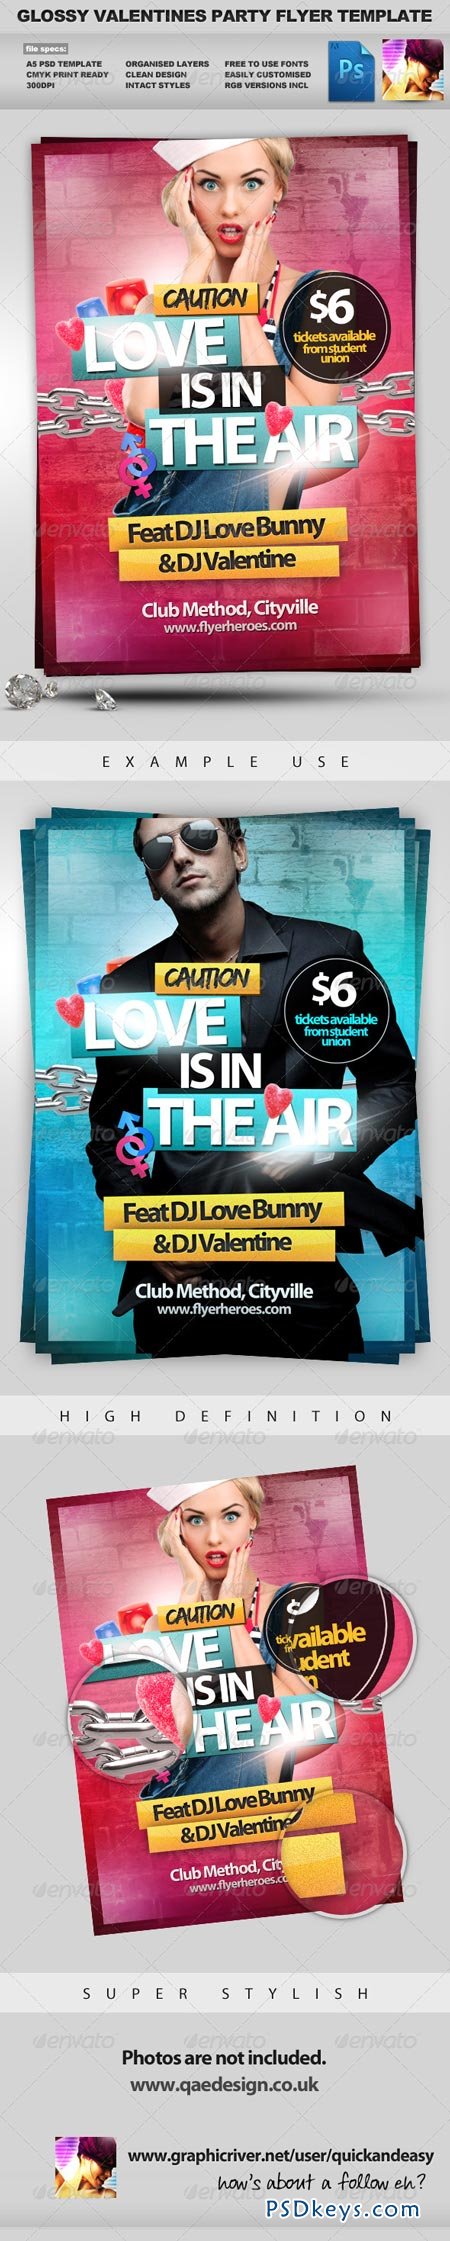 Love is in the Air - Valentines Flyer Template 1203610